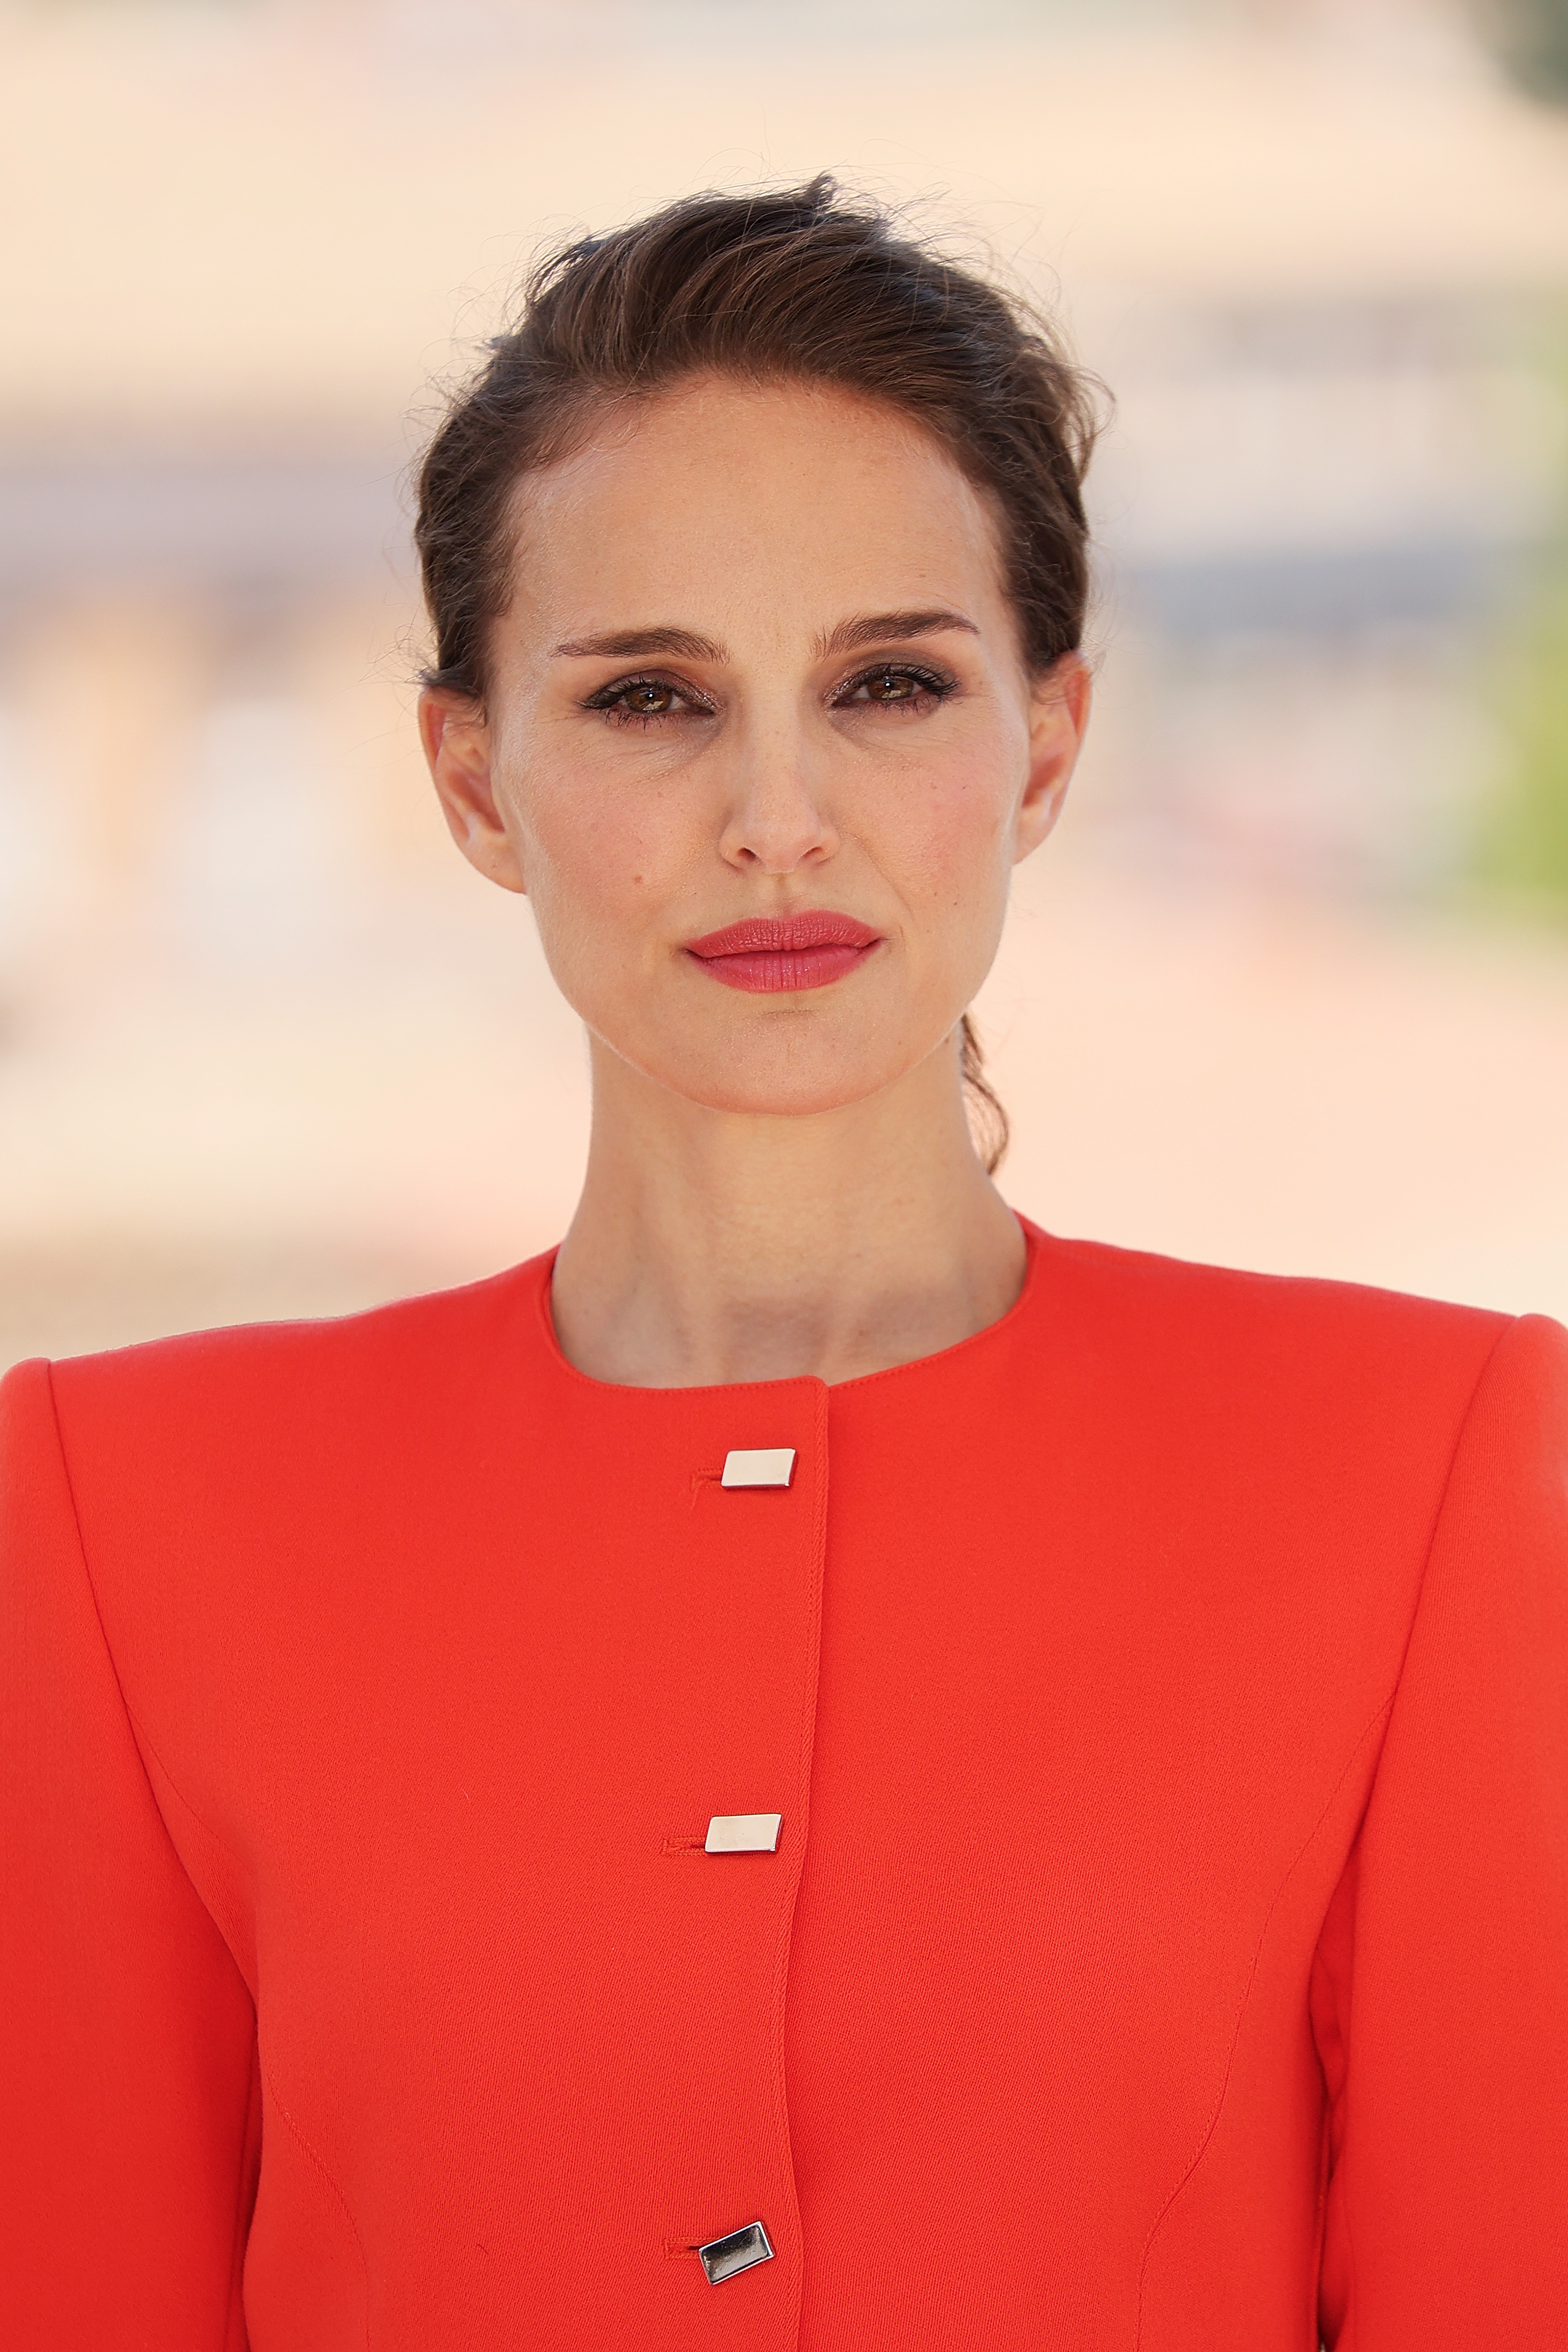 Natalie Portman on July 07, 2022 in Rome, Italy | Source: Getty Images